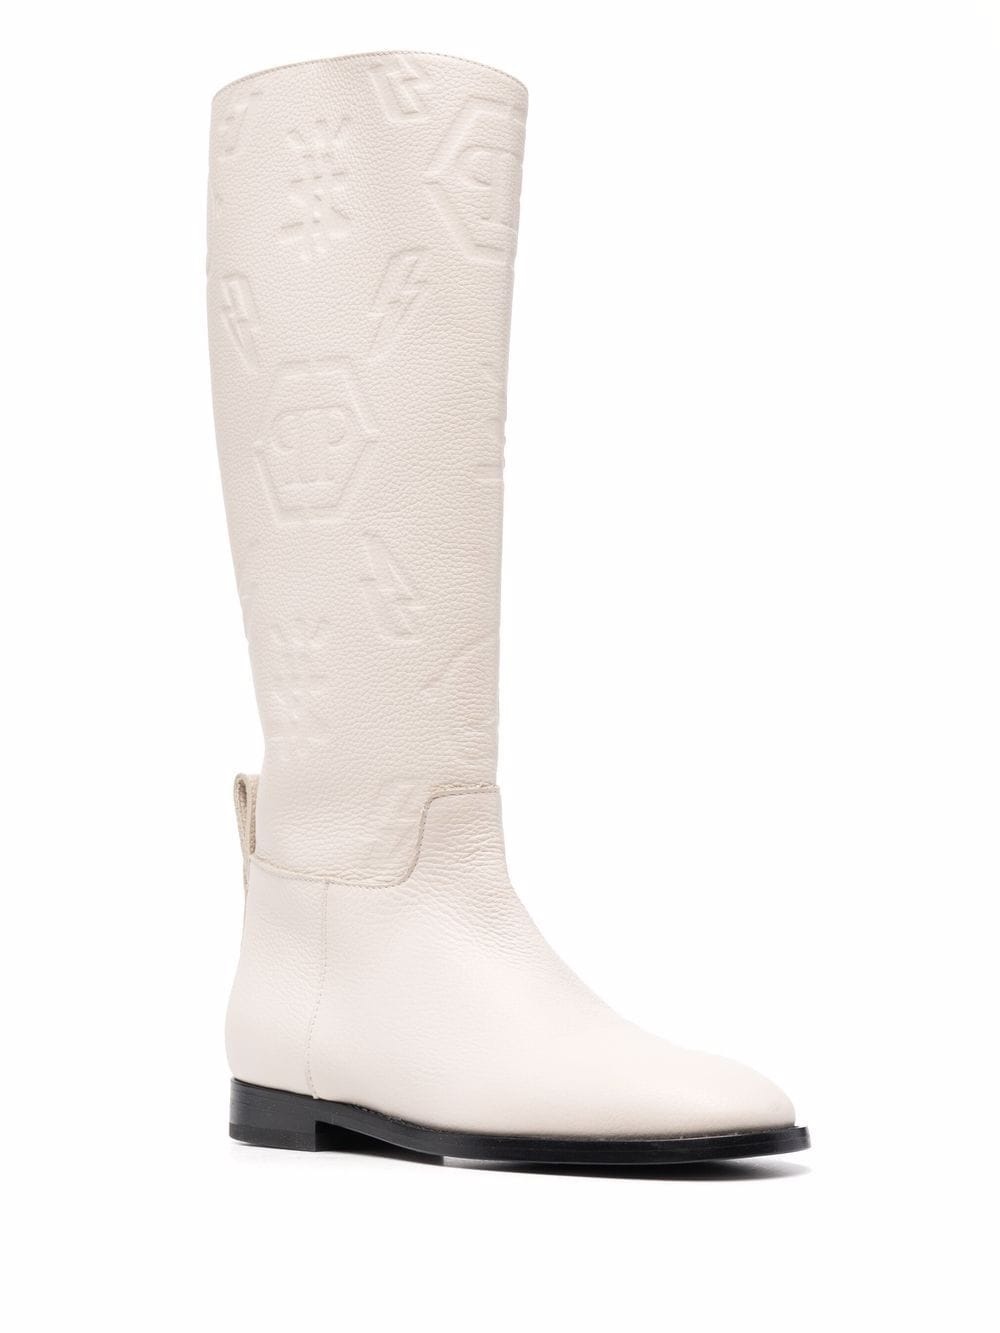 embossed-logo knee-high boots - 2